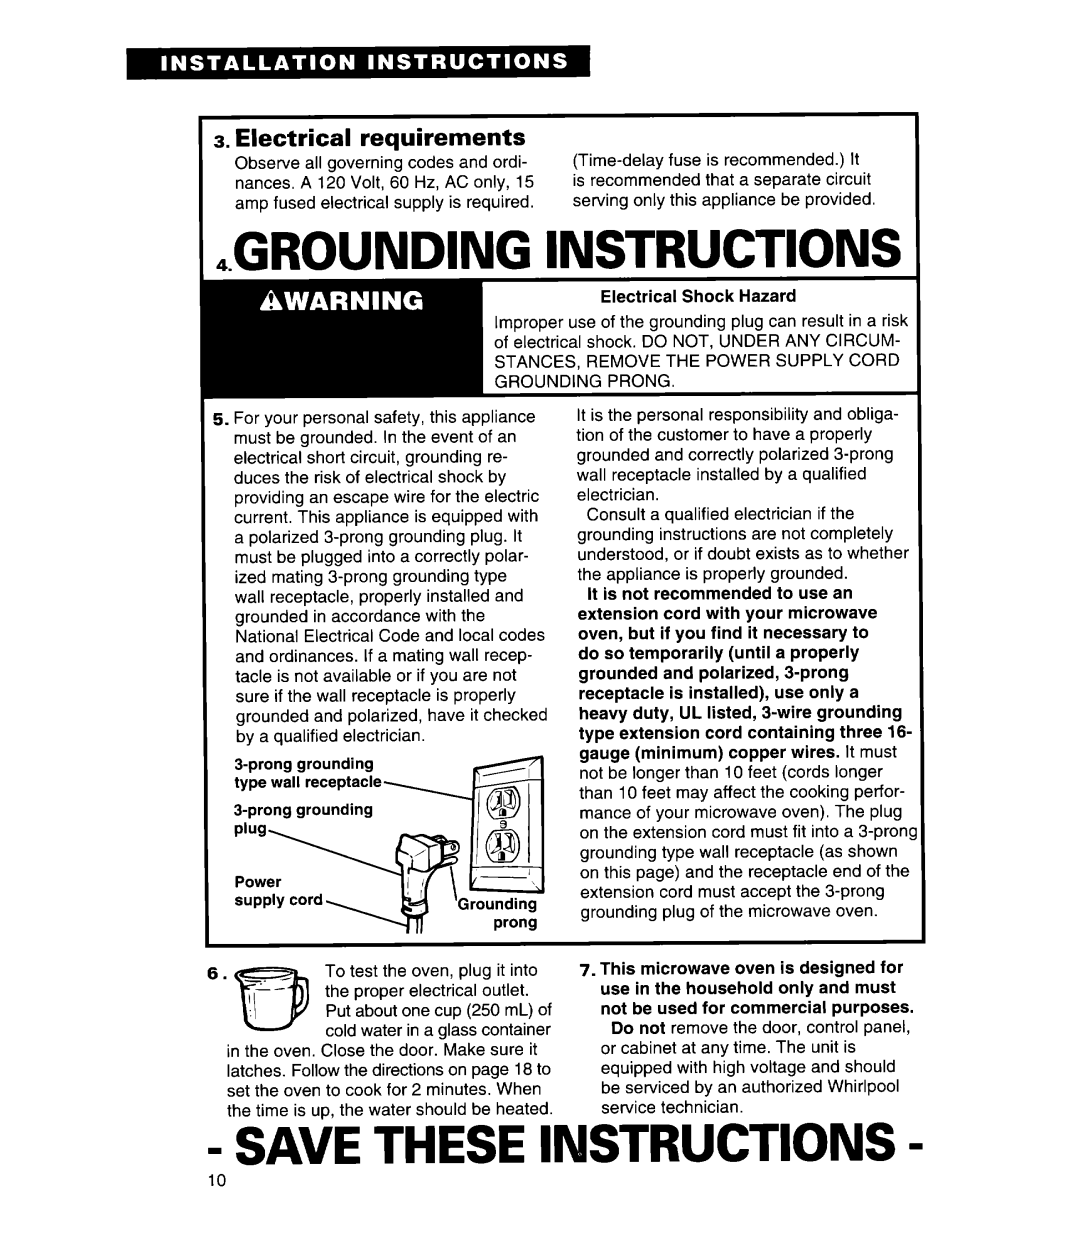 Whirlpool MT7118XD, MT7078XD, MT7116XD GROUNDlNG INSTRUCTIONS, Save These Instructions, Electrical requirements 